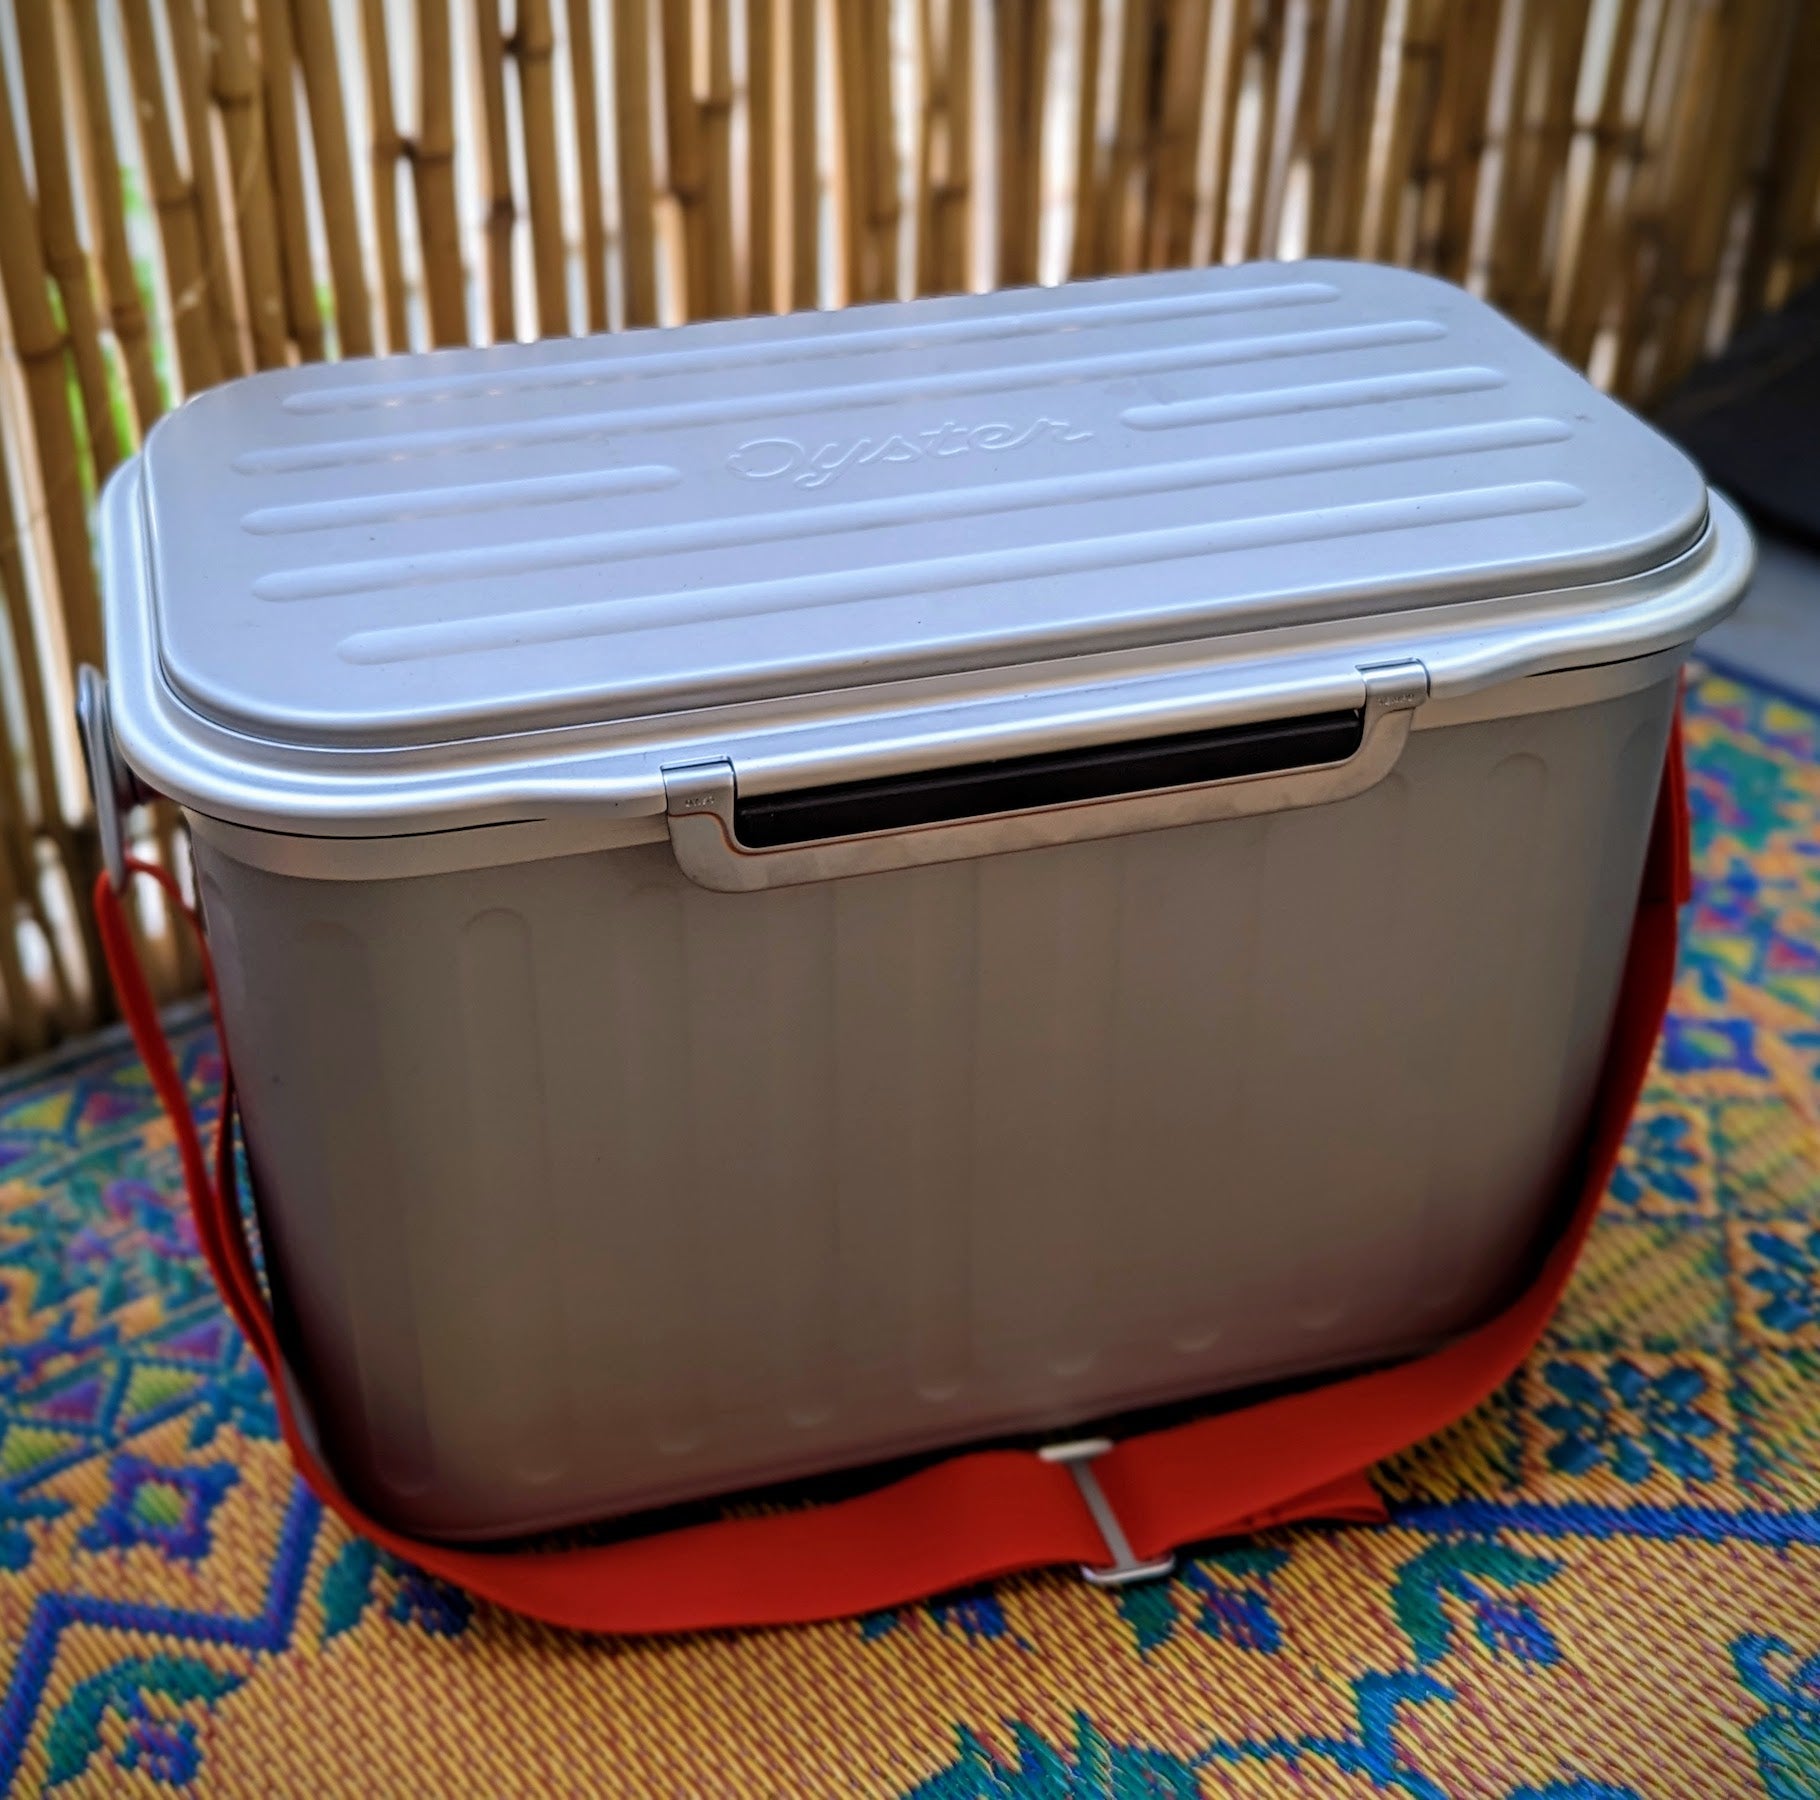 Insulated Food Containers for Eating Outdoors